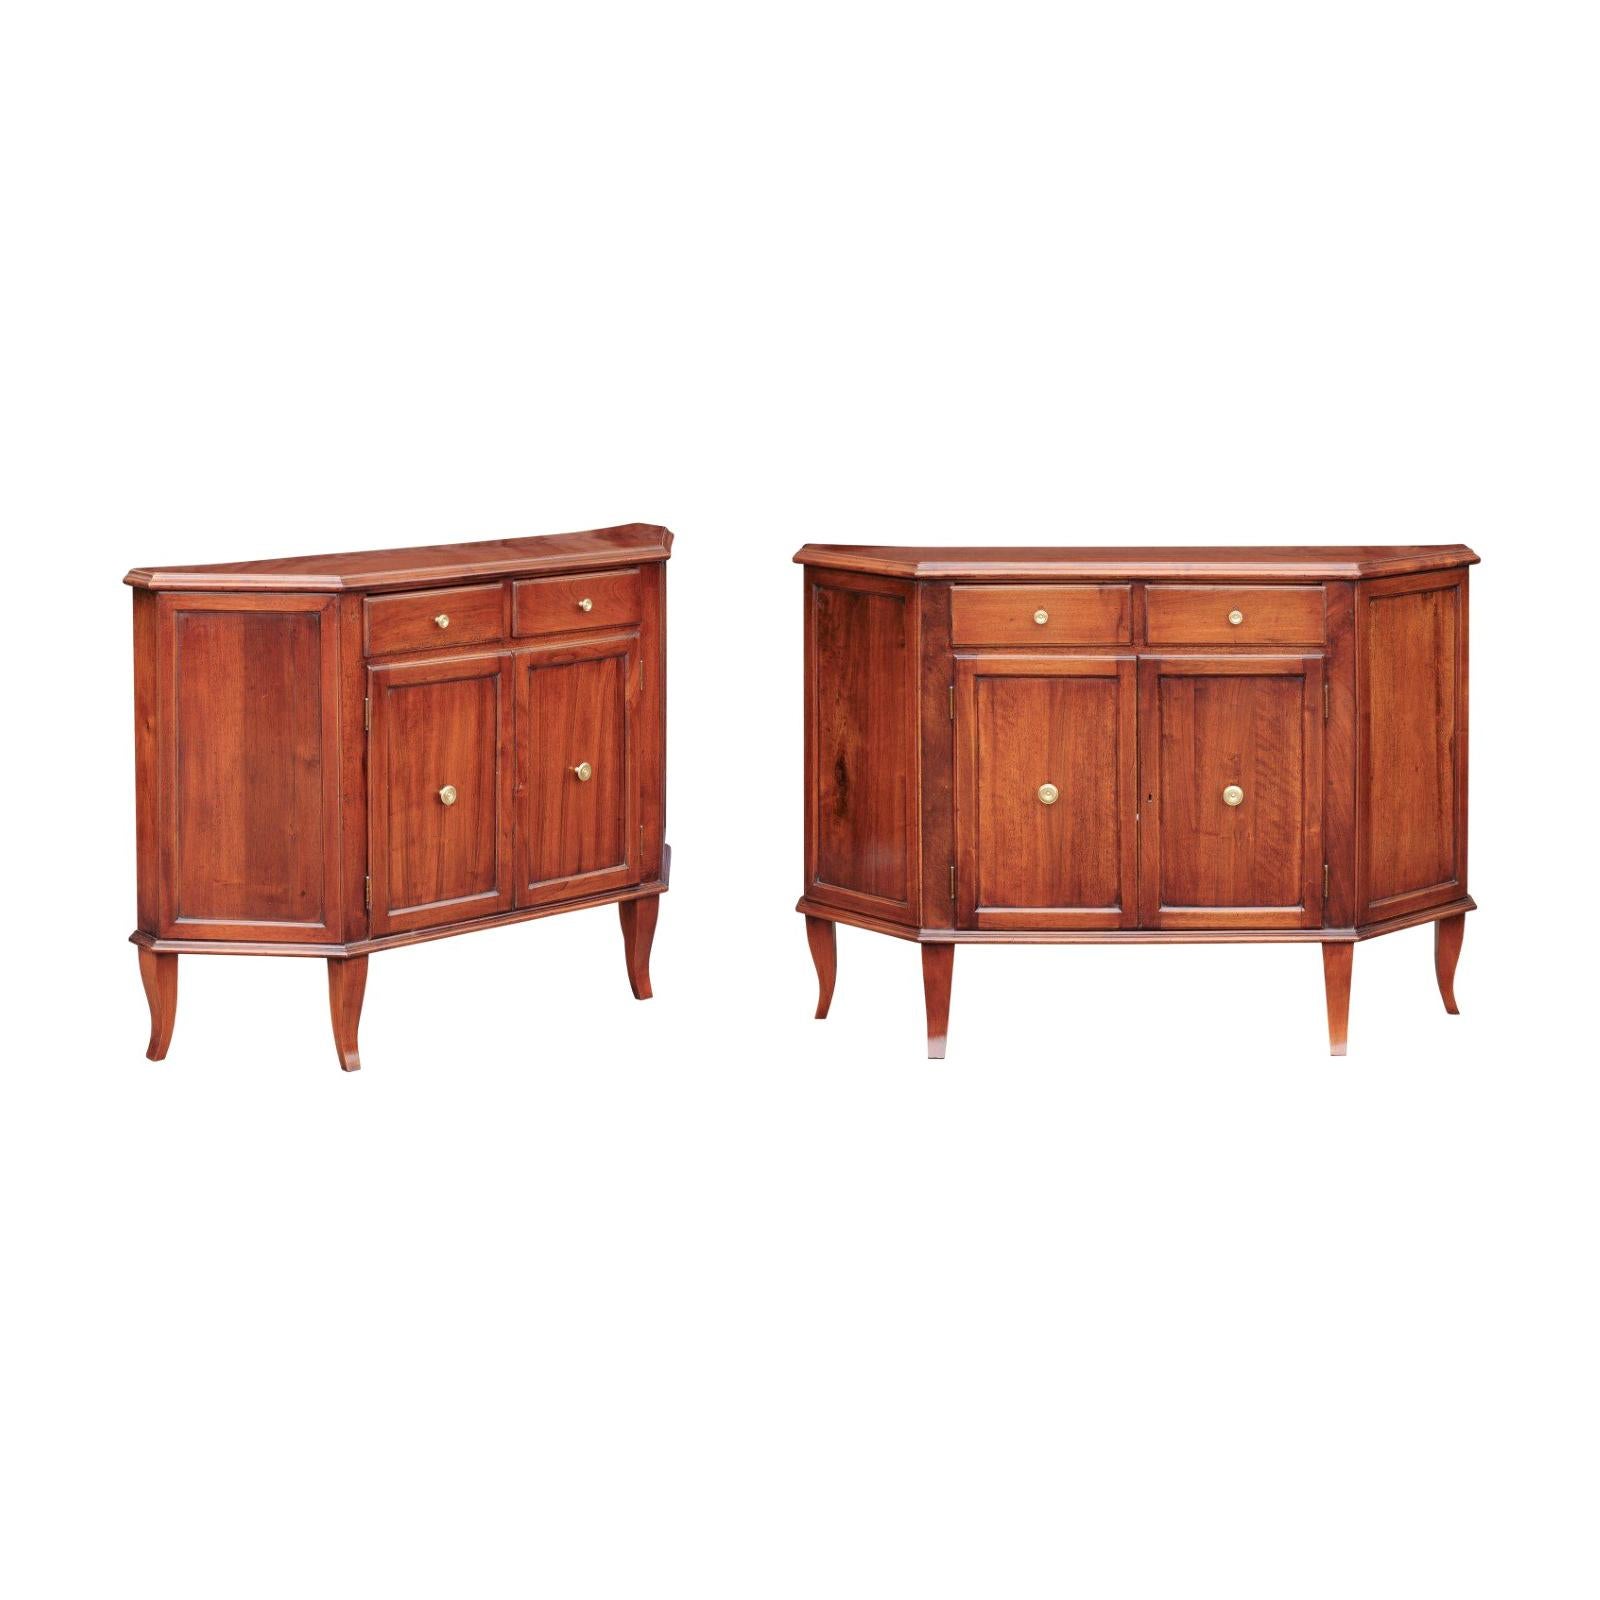 Pair of Italian 1875 Walnut Credenzas with Canted Sides, Drawers and Doors